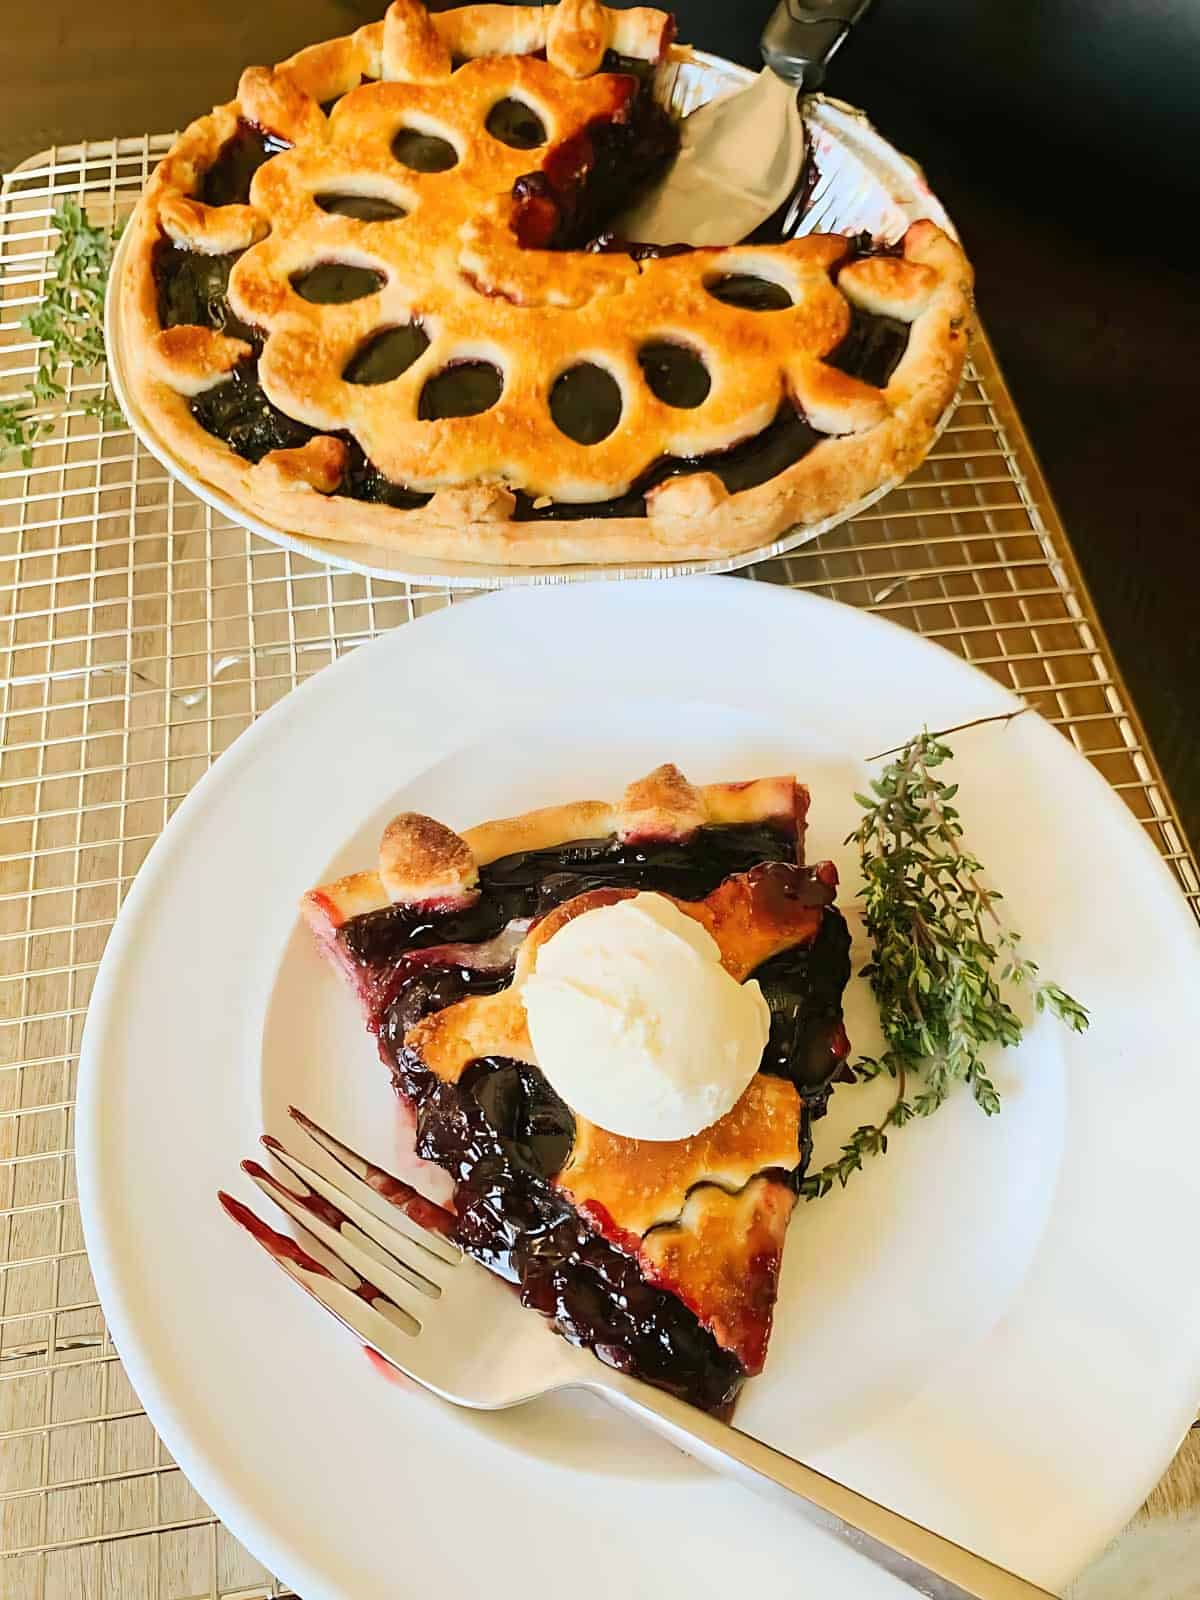 A whole cherry pie next to a slice of cherry pie on a plate, topped with cream cheese.